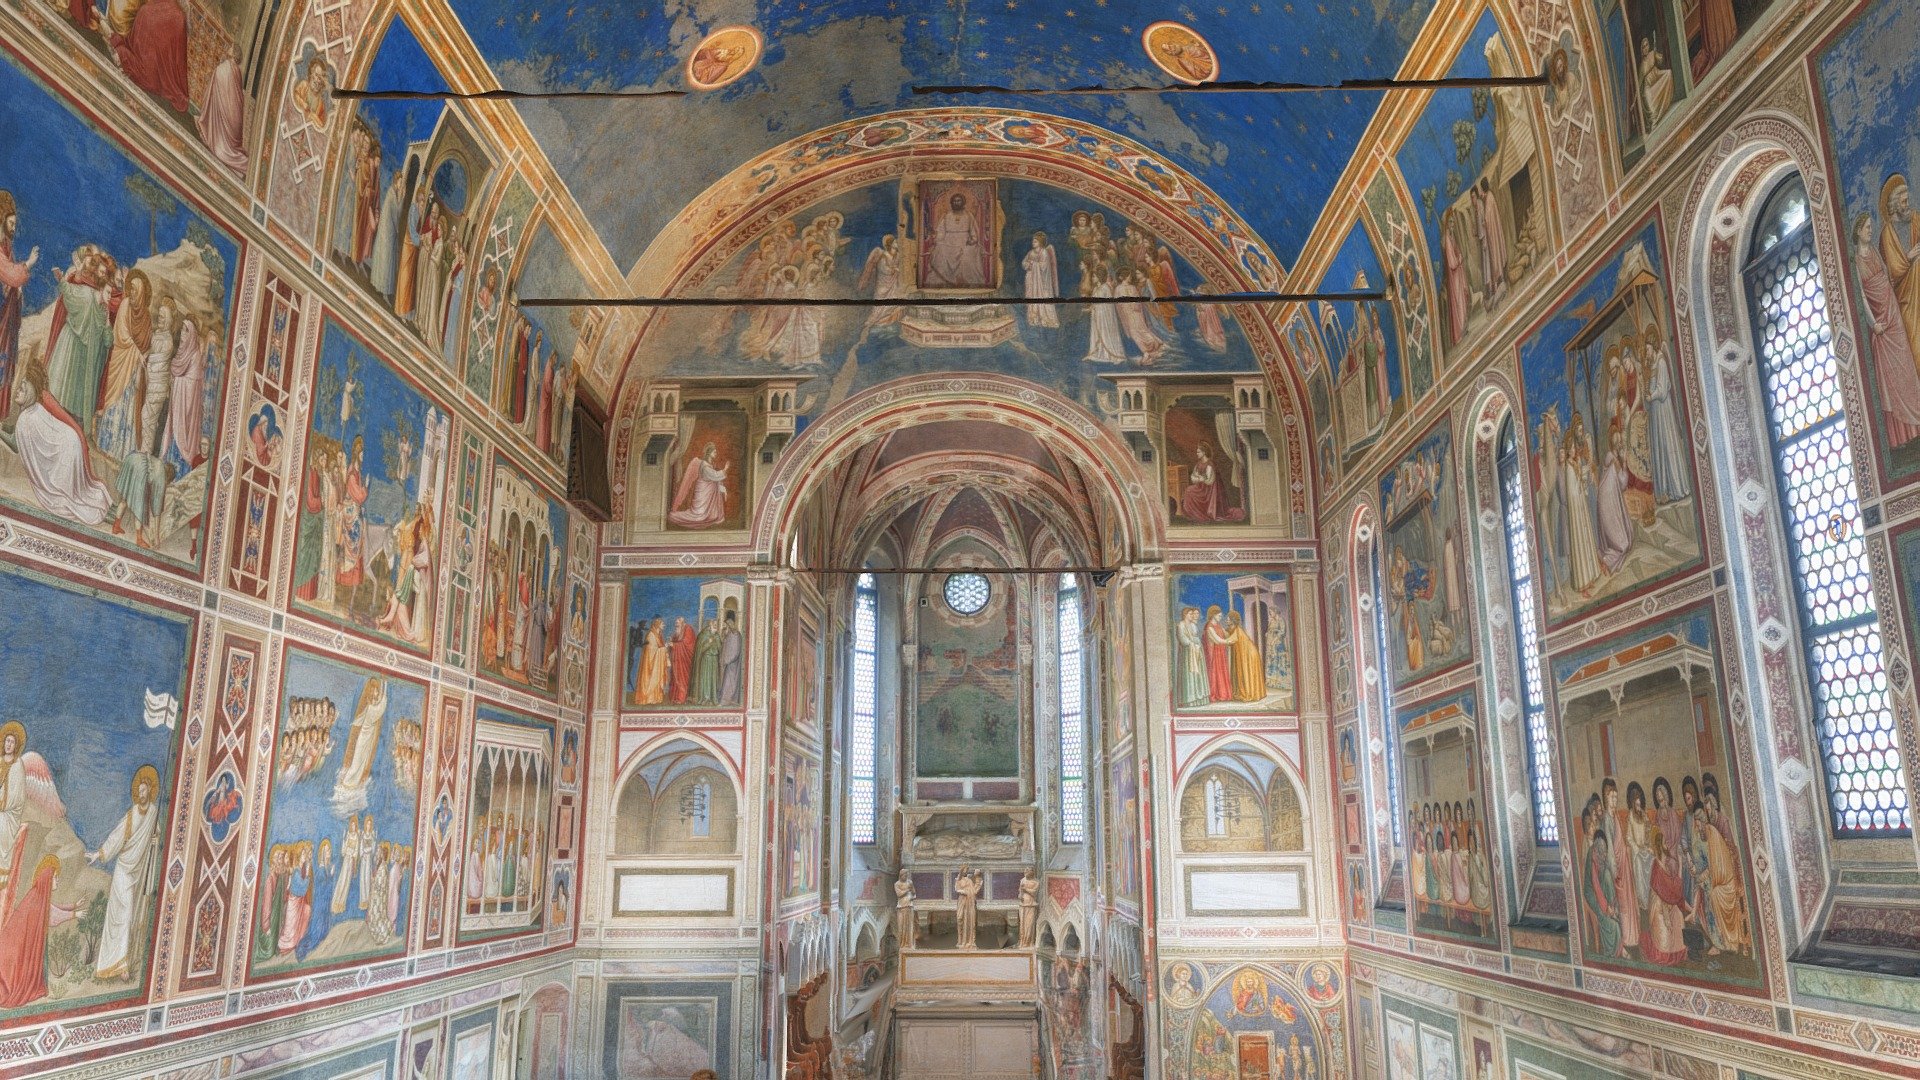 For a 360-degree tour of the Chapel, see: 



https://youtu.be/LWbAx_gDgdQ



https://youtu.be/QVUVVQ5doZs (Tour by SmartHistory)



The Scrovegni Chapel, also known as the Arena Chapel because of the nearby Ancient Roman arena.

The chapel is known for its impressive cycle of frescoes painted by Giotto, a Florentine painter and architect.

Nearly every interior surface of the chapel is covered in frescoes, depicting &ldquo;The Life of Christ